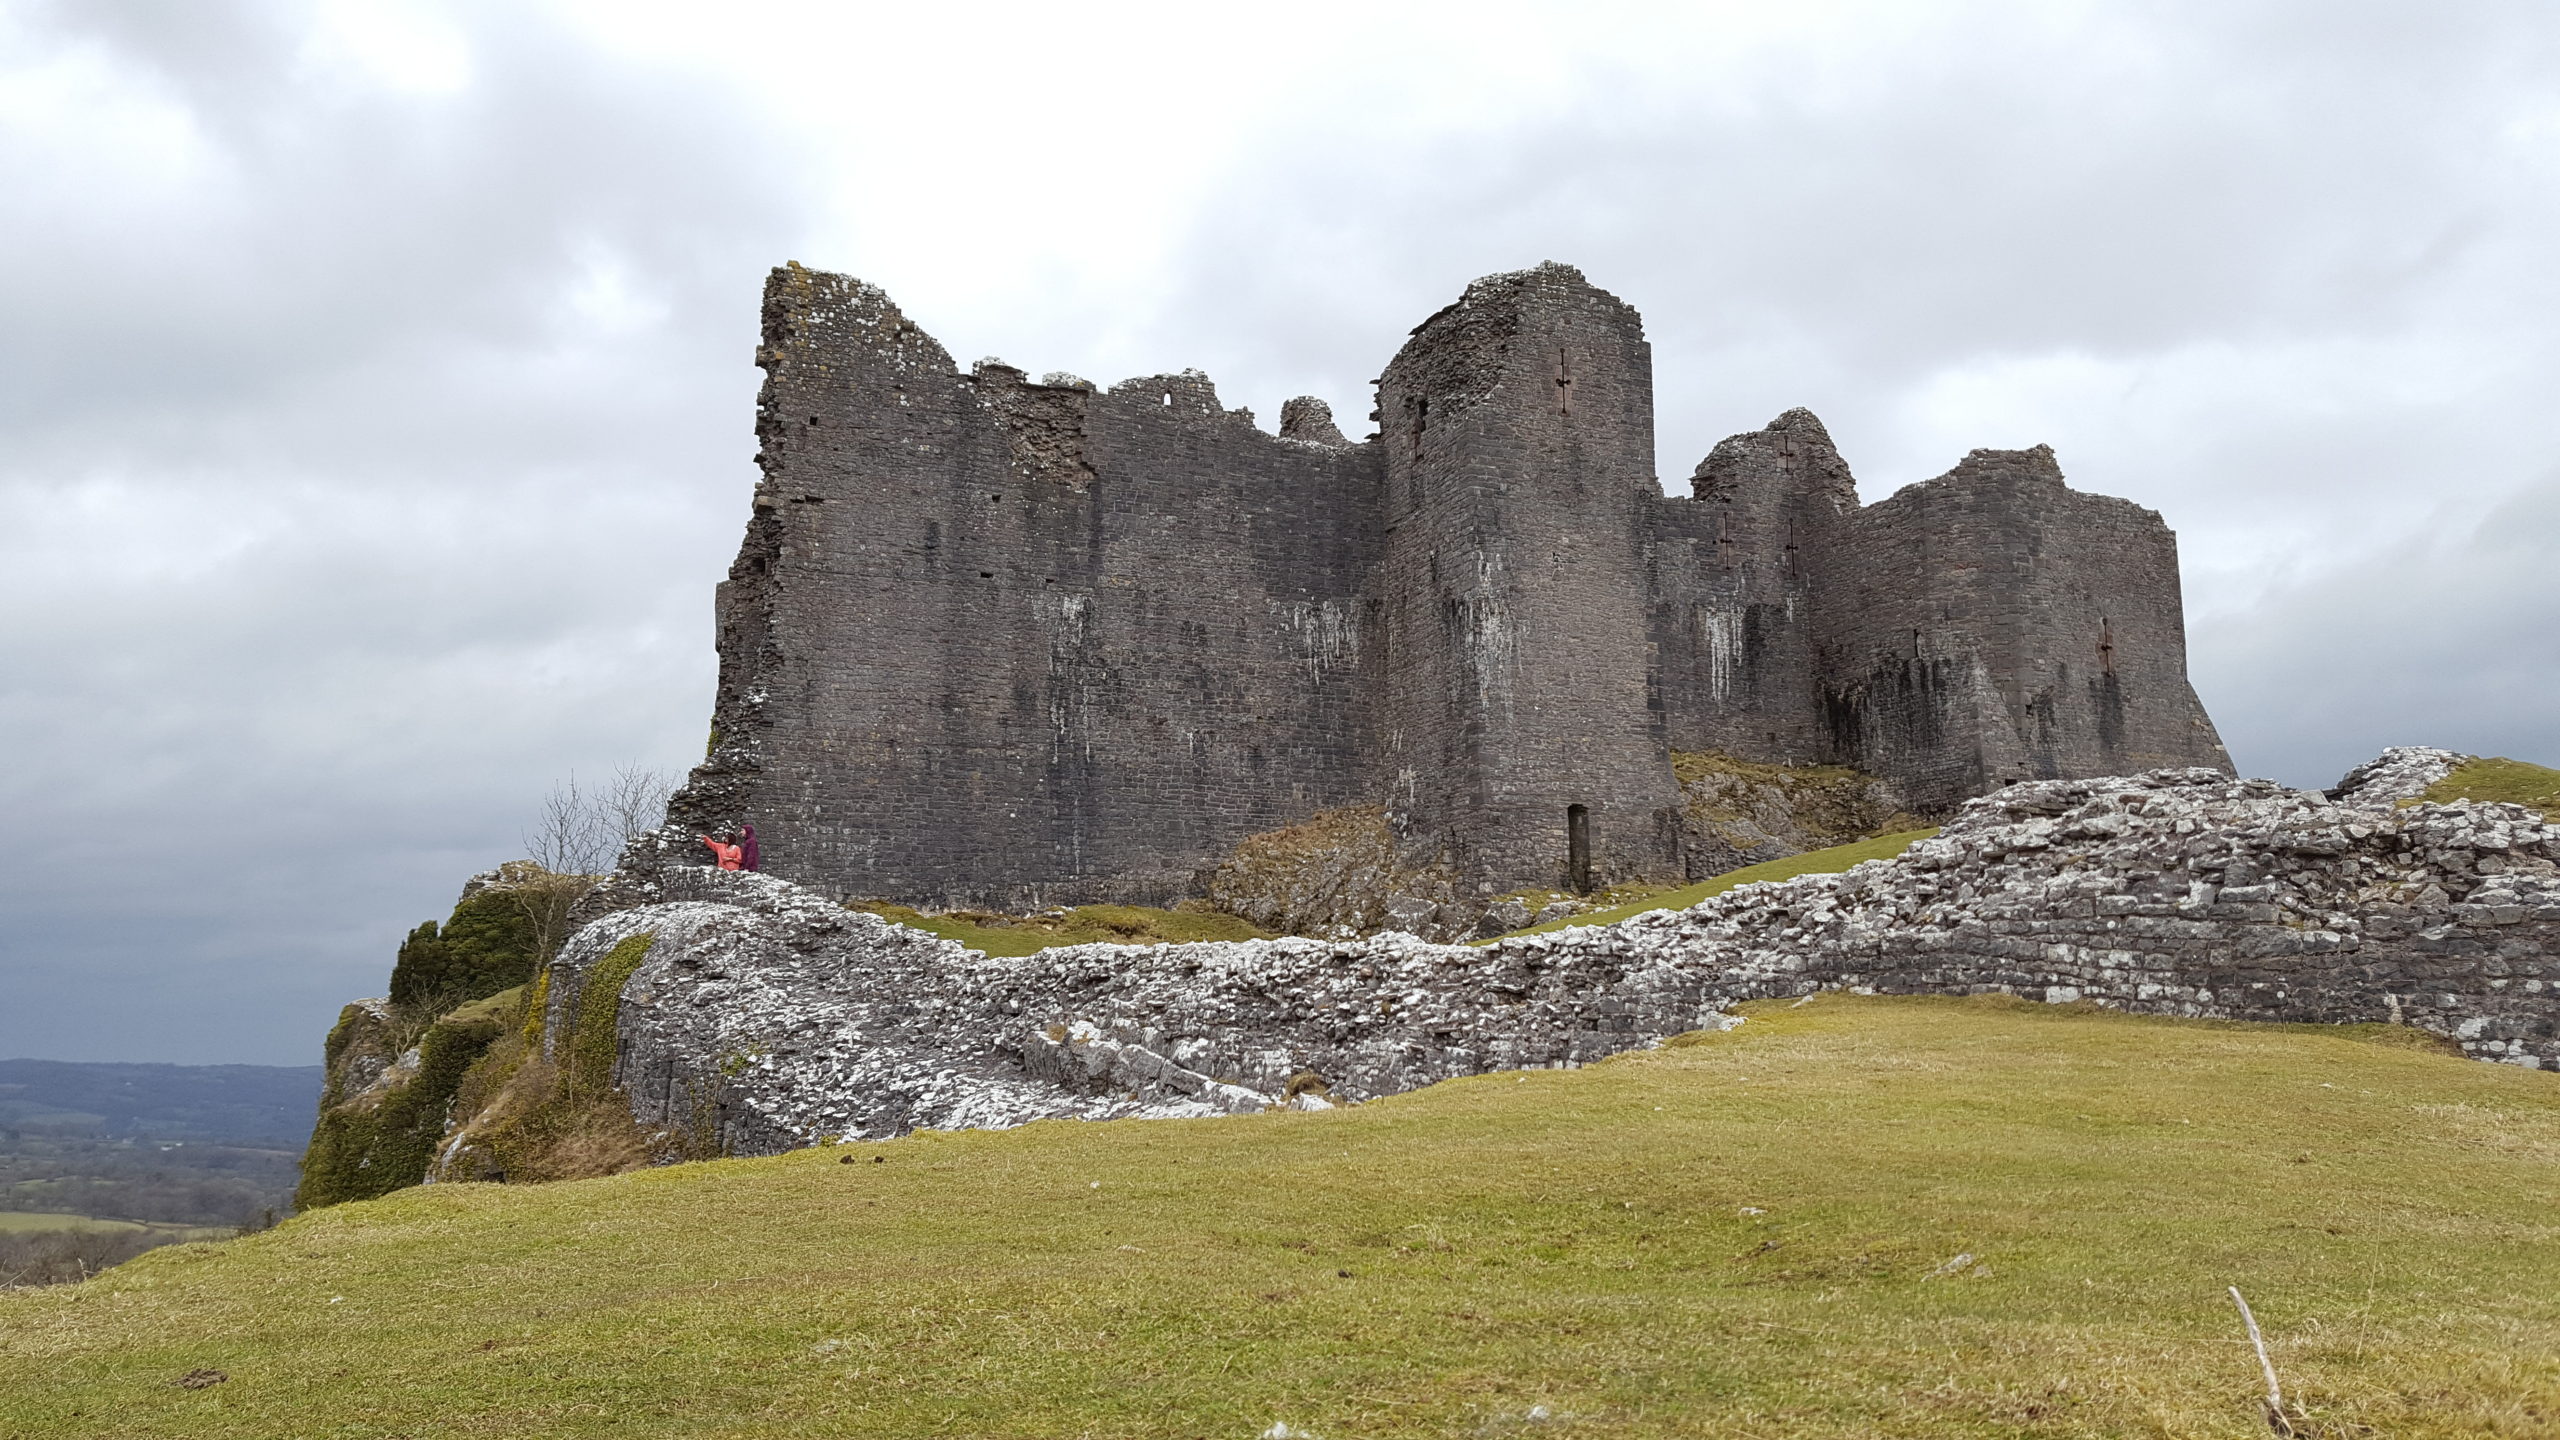 Carreg Cennen in the Wars of the Roses